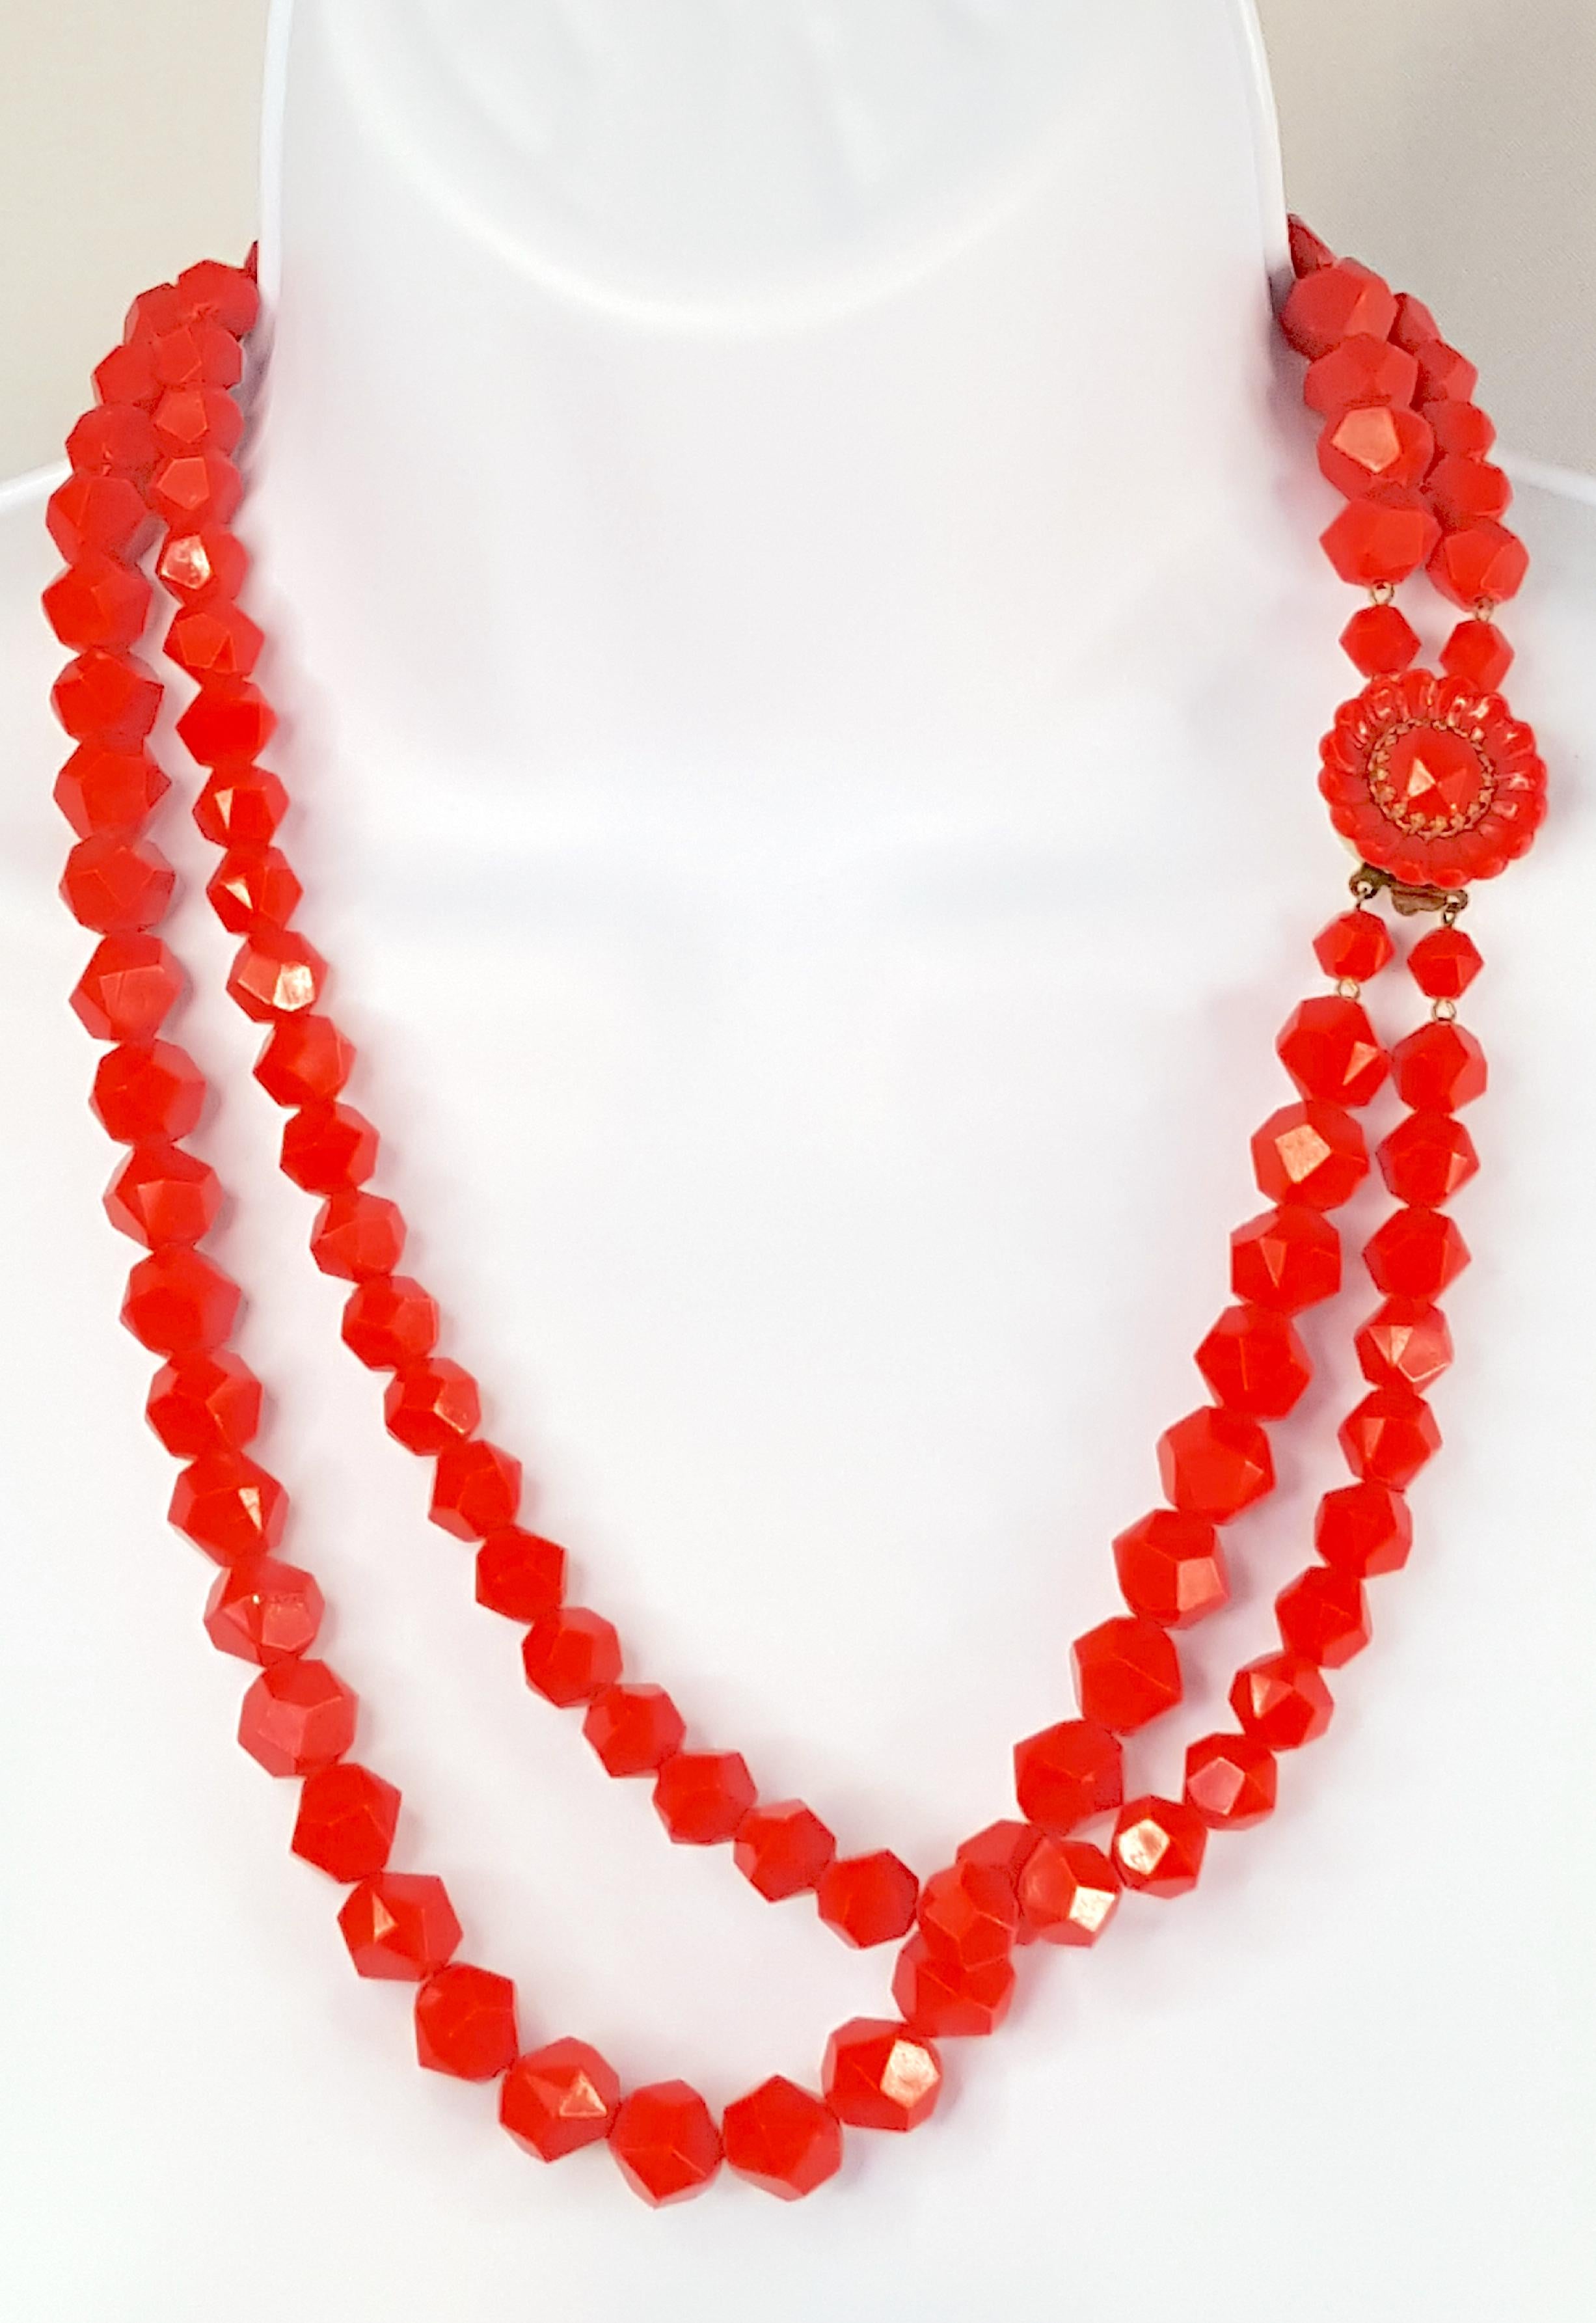 Modern WesternGermany 1950s CherryRed MoldFacetedBead FlowerClasp DoubleStrand Necklace For Sale